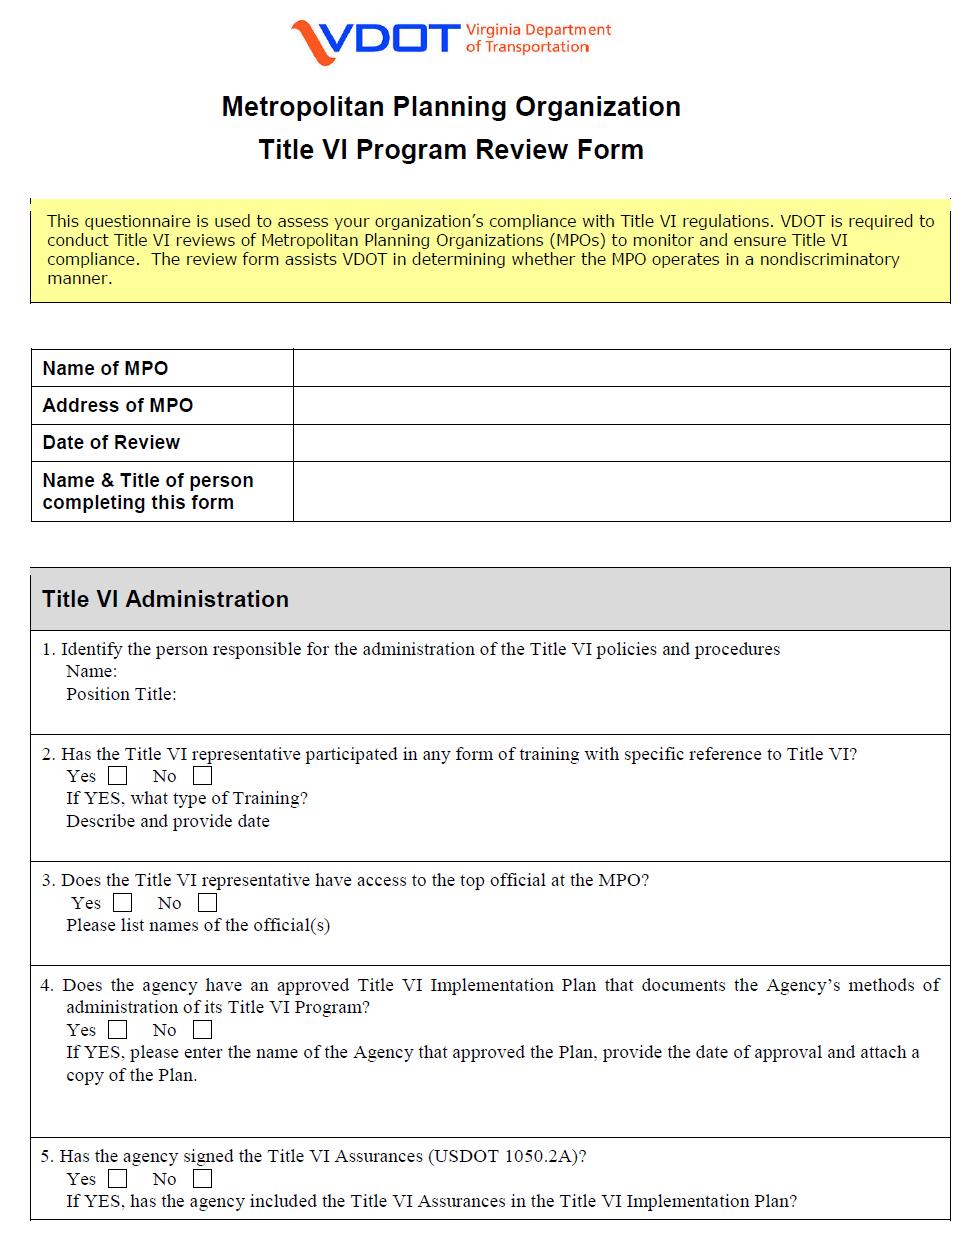 APPENDIX G MPO and PDC Review Forms,